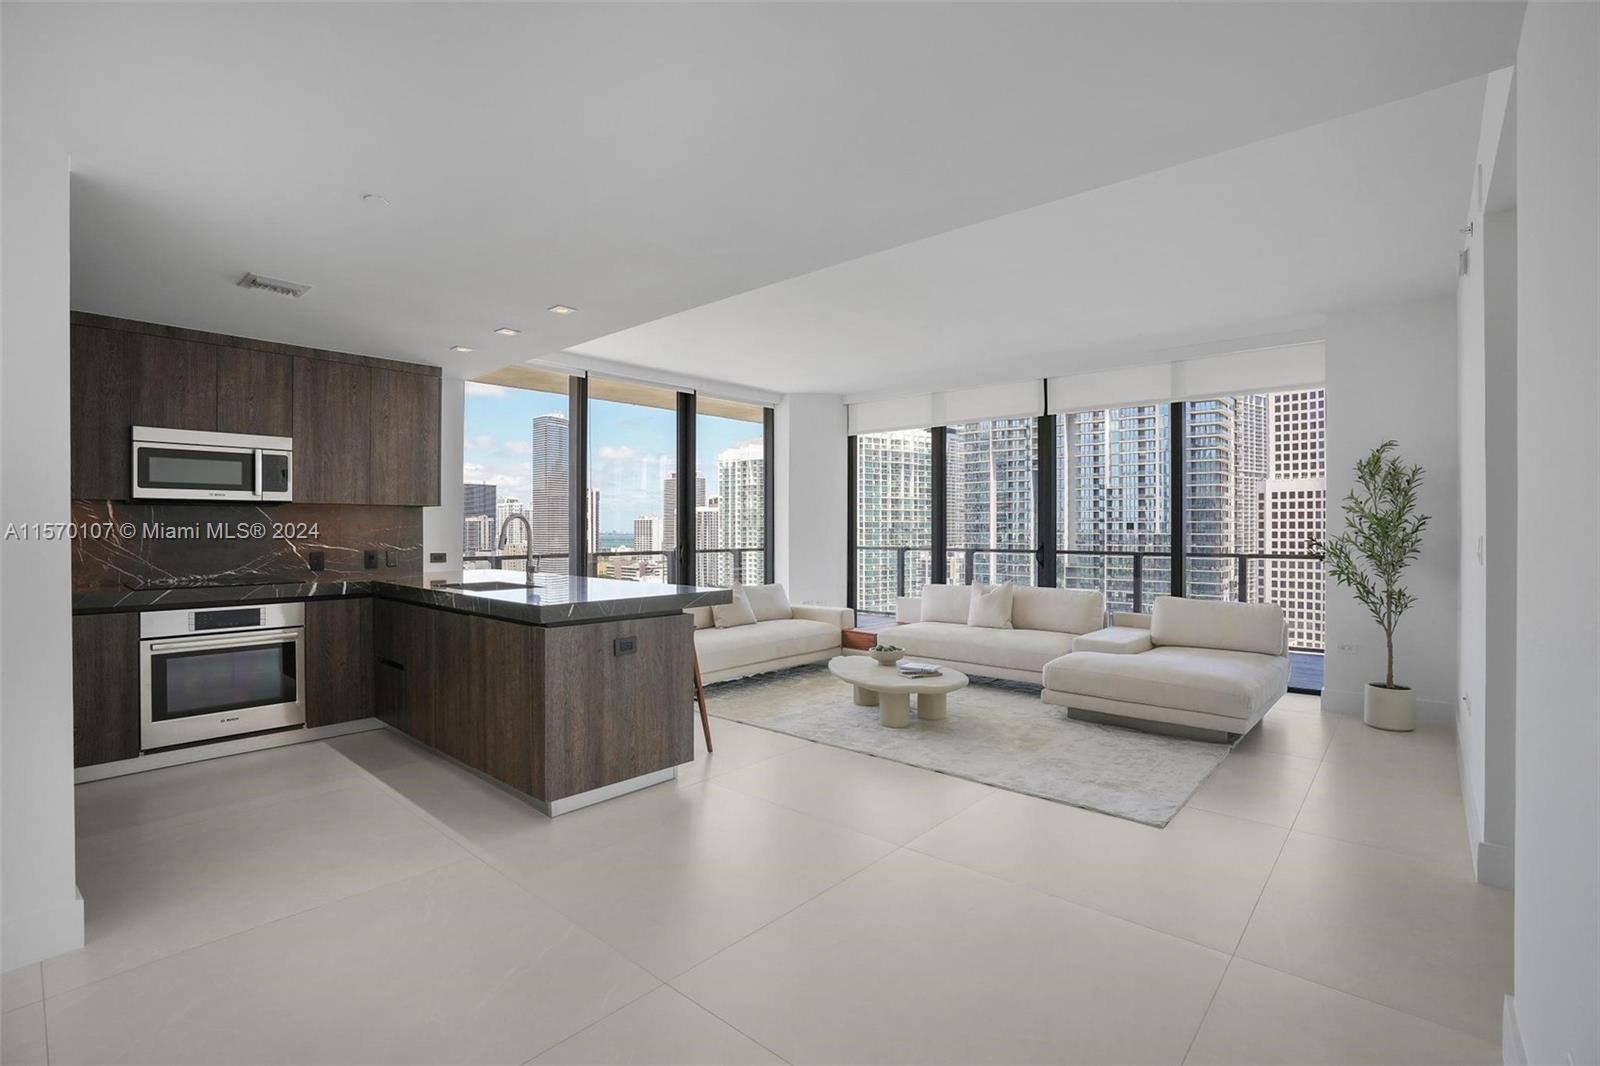 This fully remodeled 2-bed, 2.5-bath sanctuary boasts breathtaking sunrise views of Biscayne Bay and the City. Stride into elegance with 48x48 Gubi Porcelain tile flooring throughout. The modern kitchen features Italian cabinetry, honed marble countertops, premium Bosch appliances, and a wine cooler. Indulge in the primary bathroom's freestanding bathtub and stunning 120x120 Eco Ceramics wall tiles. 

Enjoy seamless indoor-outdoor living with a wrap-around balcony and floor-to-ceiling windows, complemented by electronic blinds in the bedrooms. Steps away from Brickell City Centre, The Rise Condo offers 5-star amenities, including a state-of-the-art fitness center, 24-hour concierge, valet services, heated pool, business center, child's playroom, Hamman spa, and steam room.